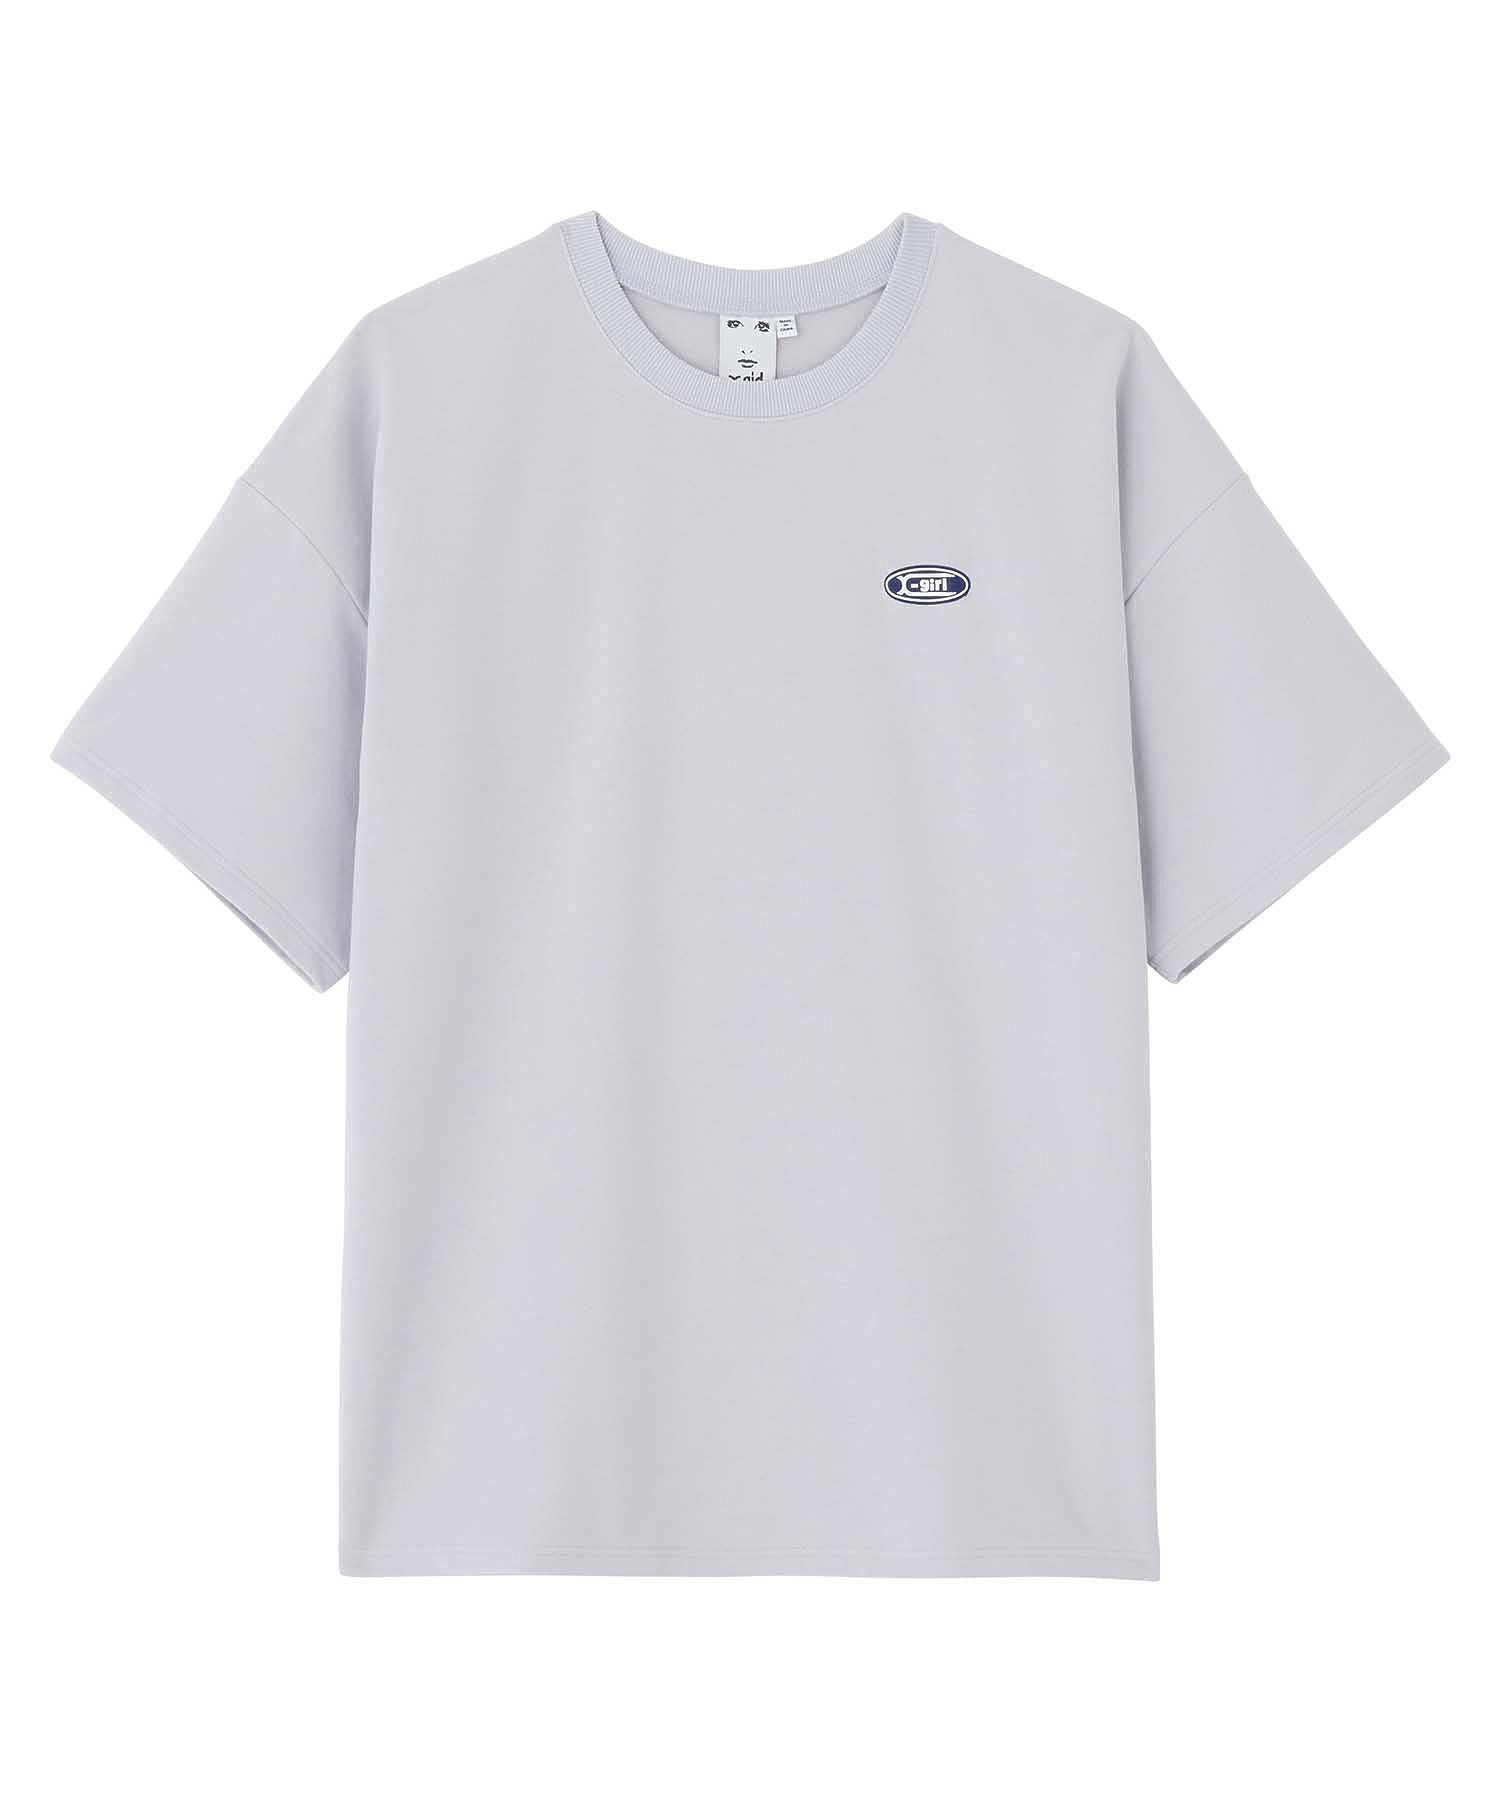 OVAL LOGO RUBBER PATCH TEE X-girl